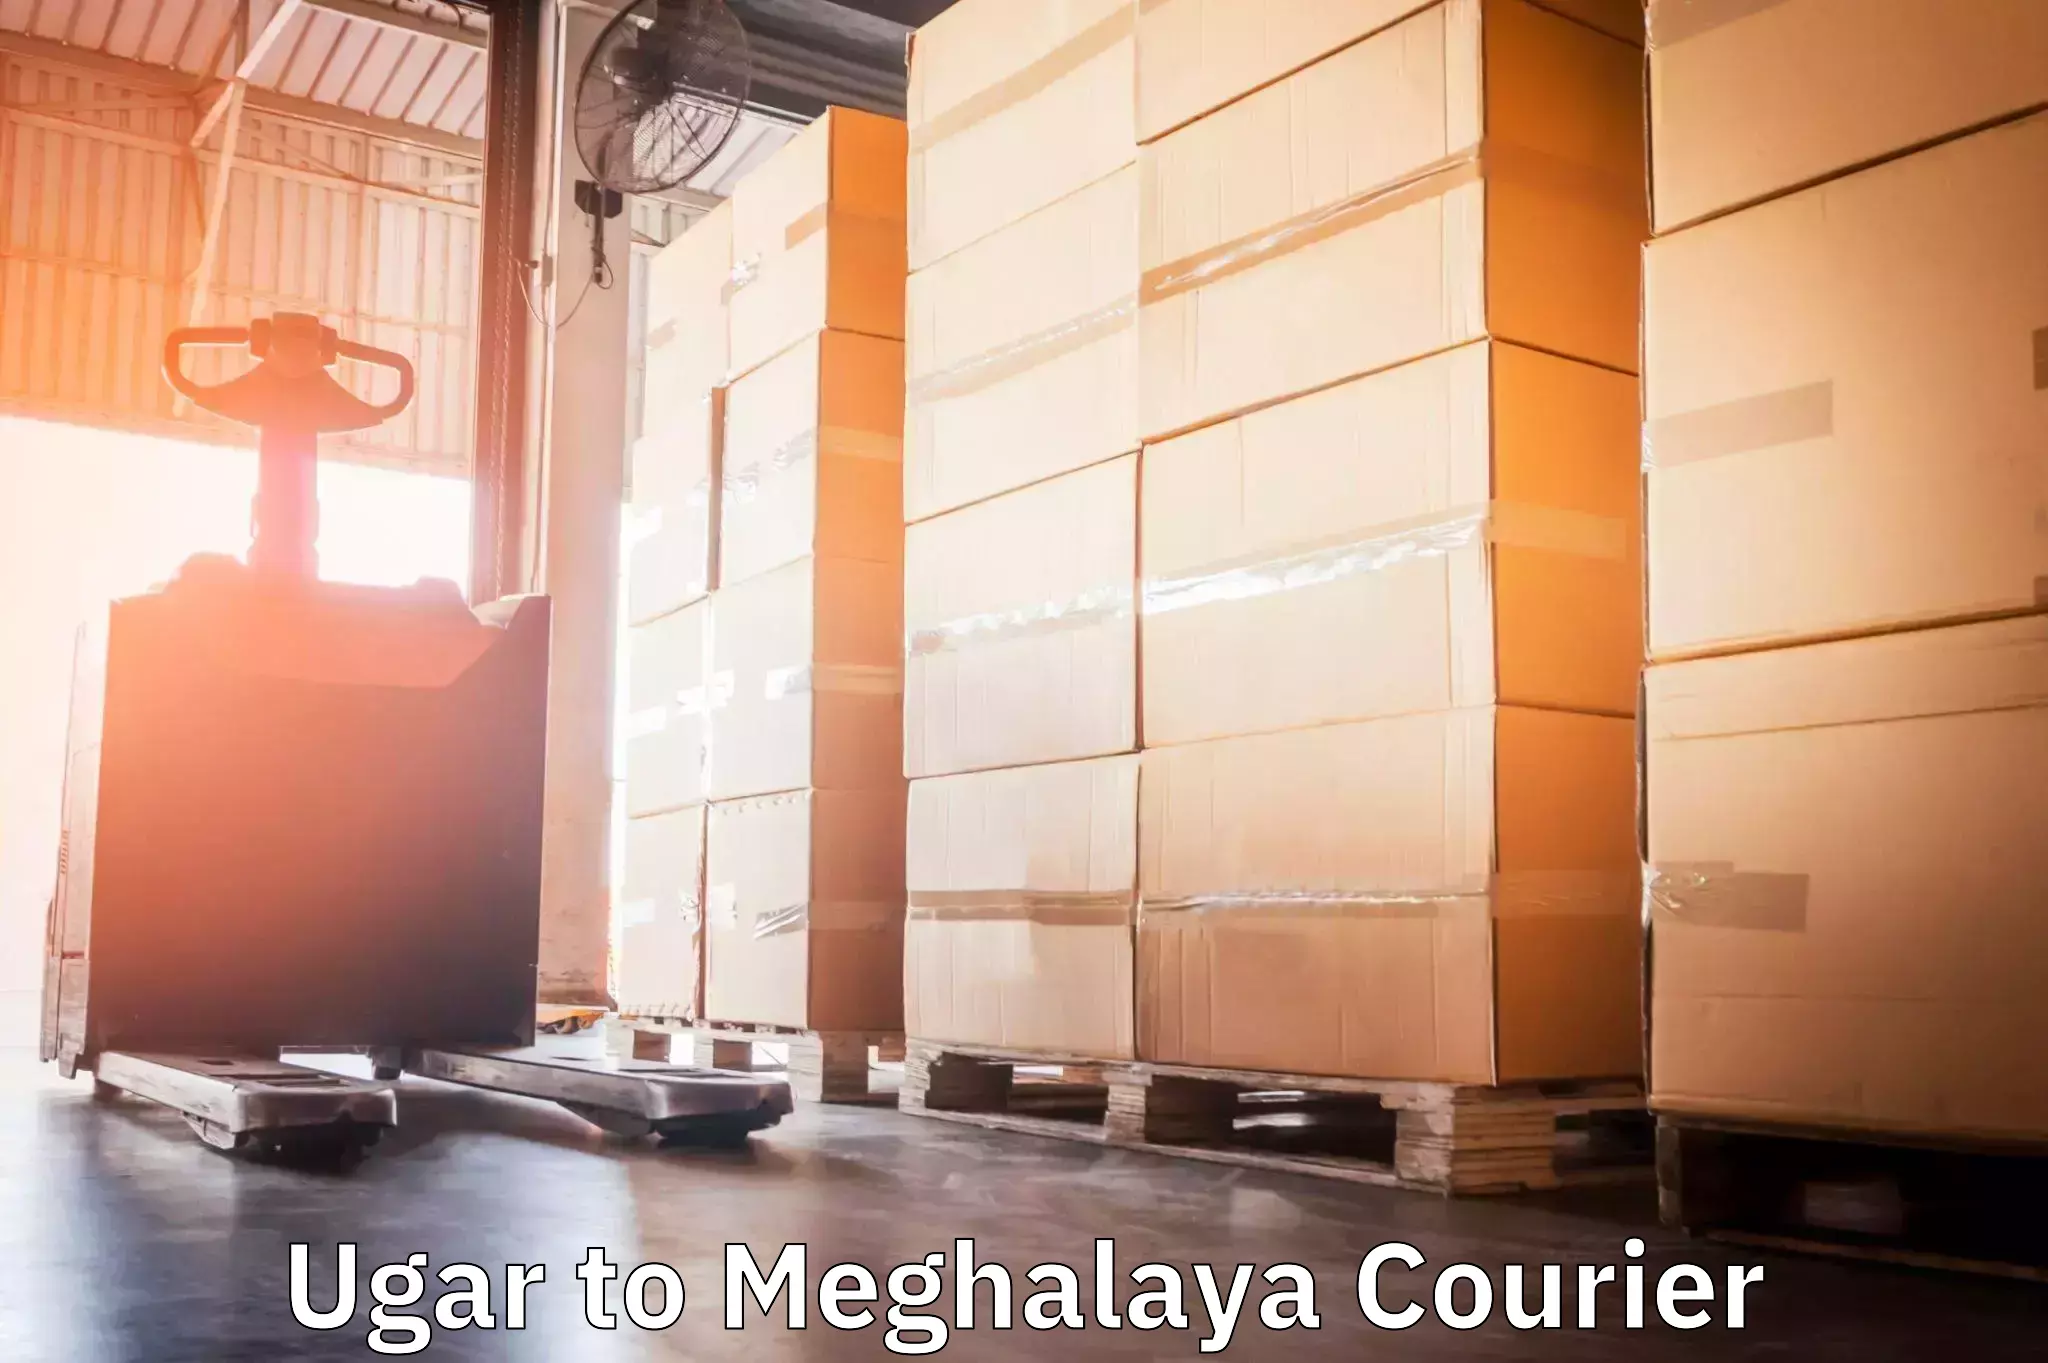 User-friendly delivery service in Ugar to Meghalaya